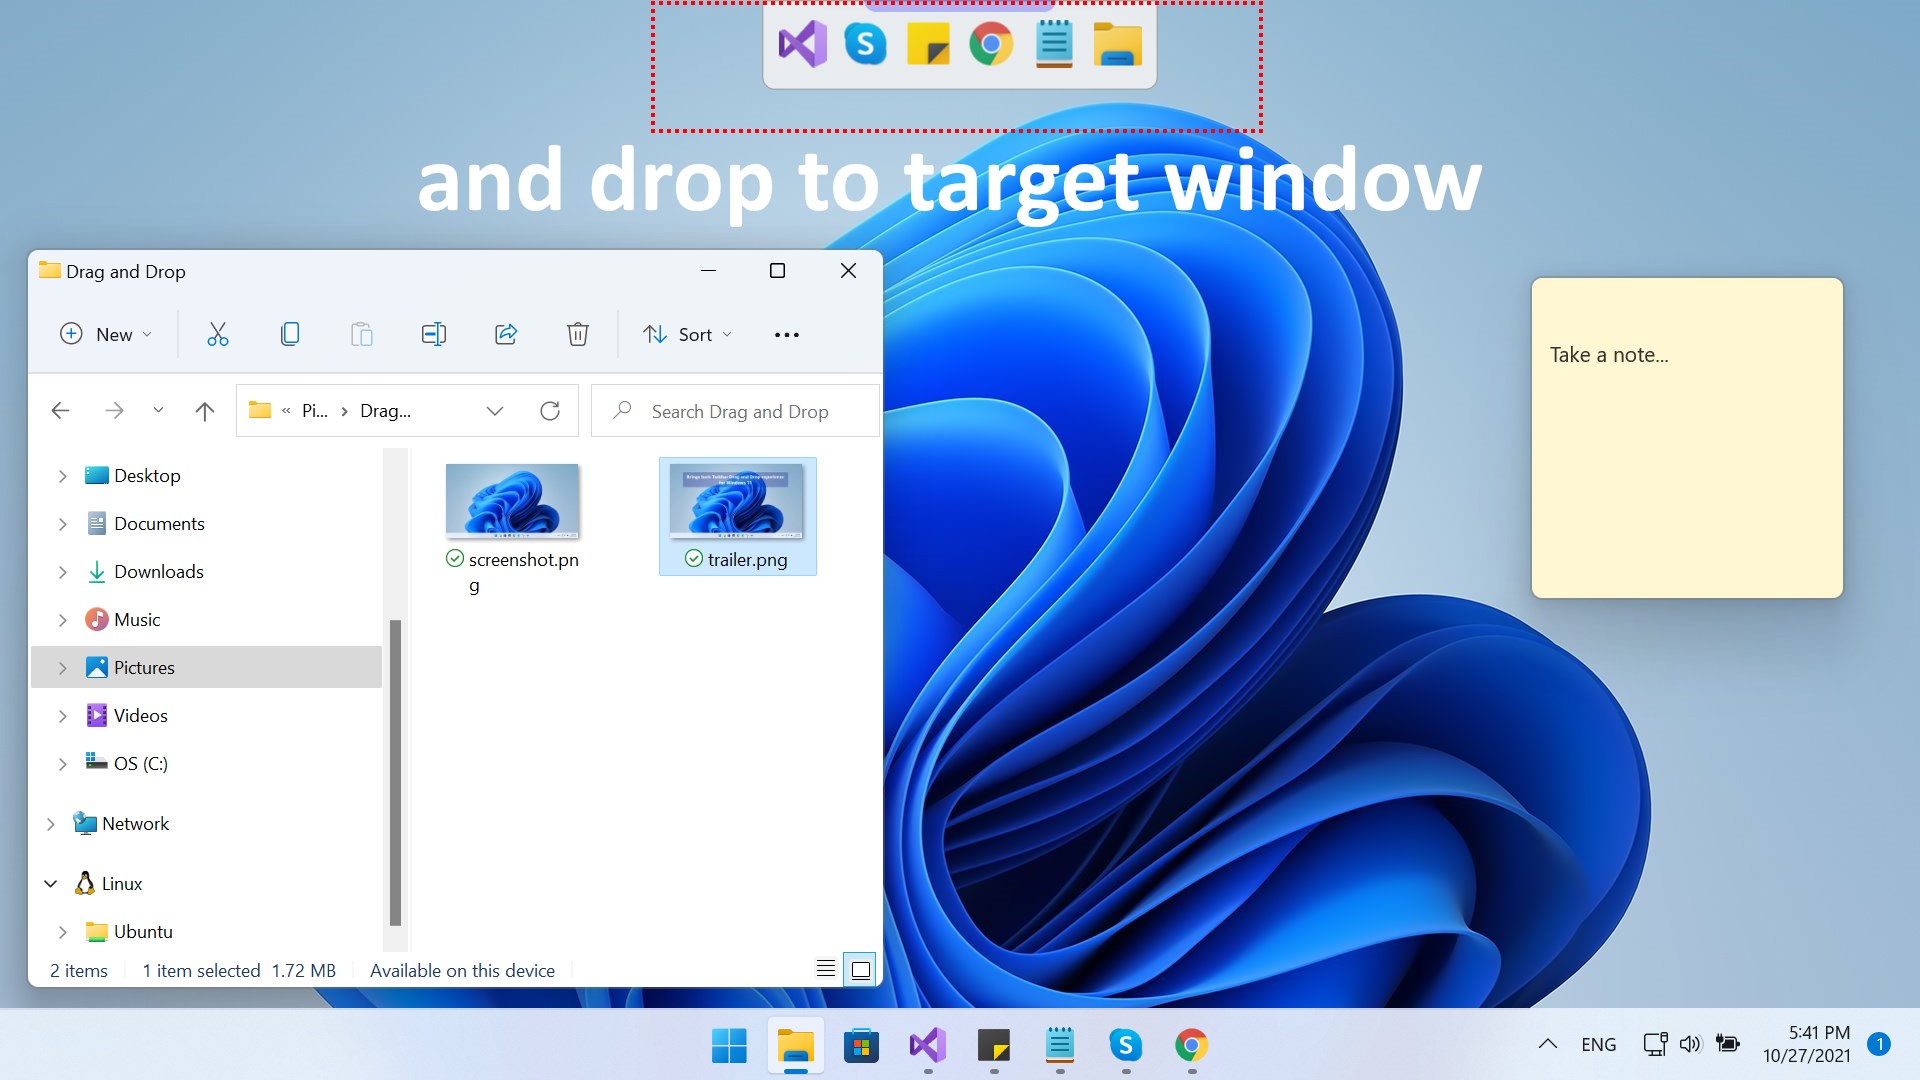 Drag and Drop Toolbar for Windows 11